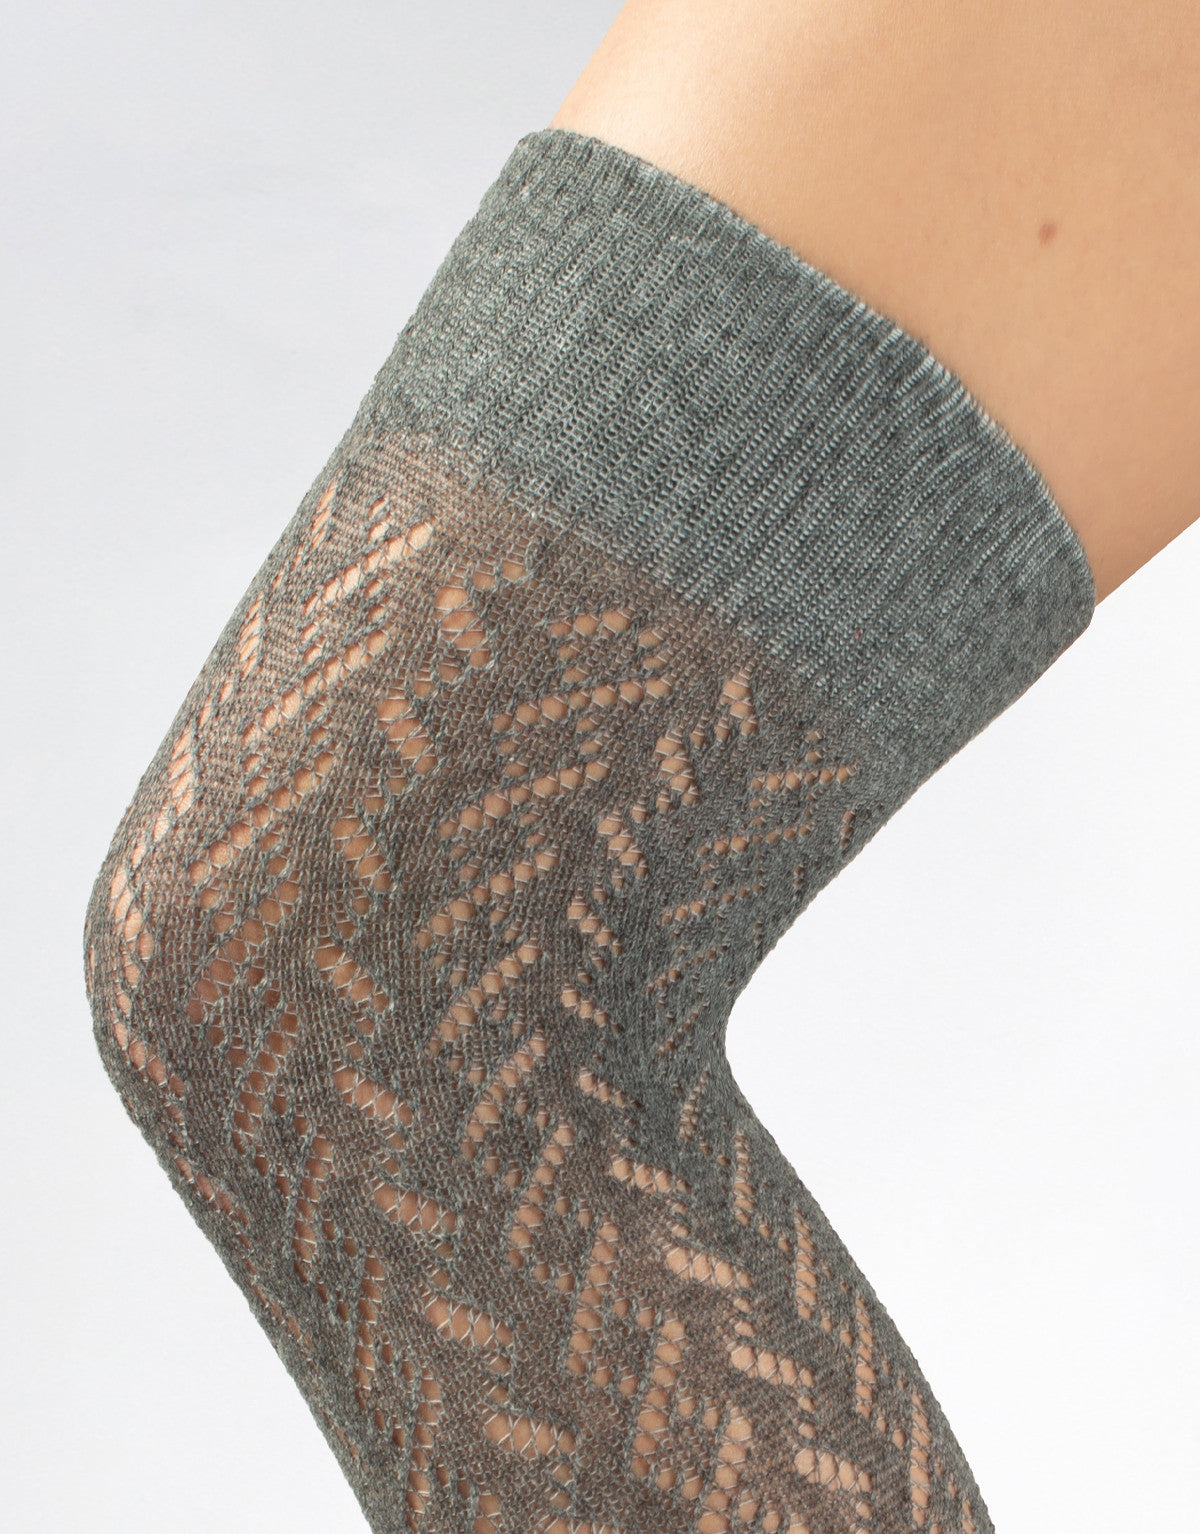 Calzitaly Chevron Over-Knee Socks - Grey knitted over the knee socks with an openwork cable style pattern, plain elasticated cuff and plain toe.